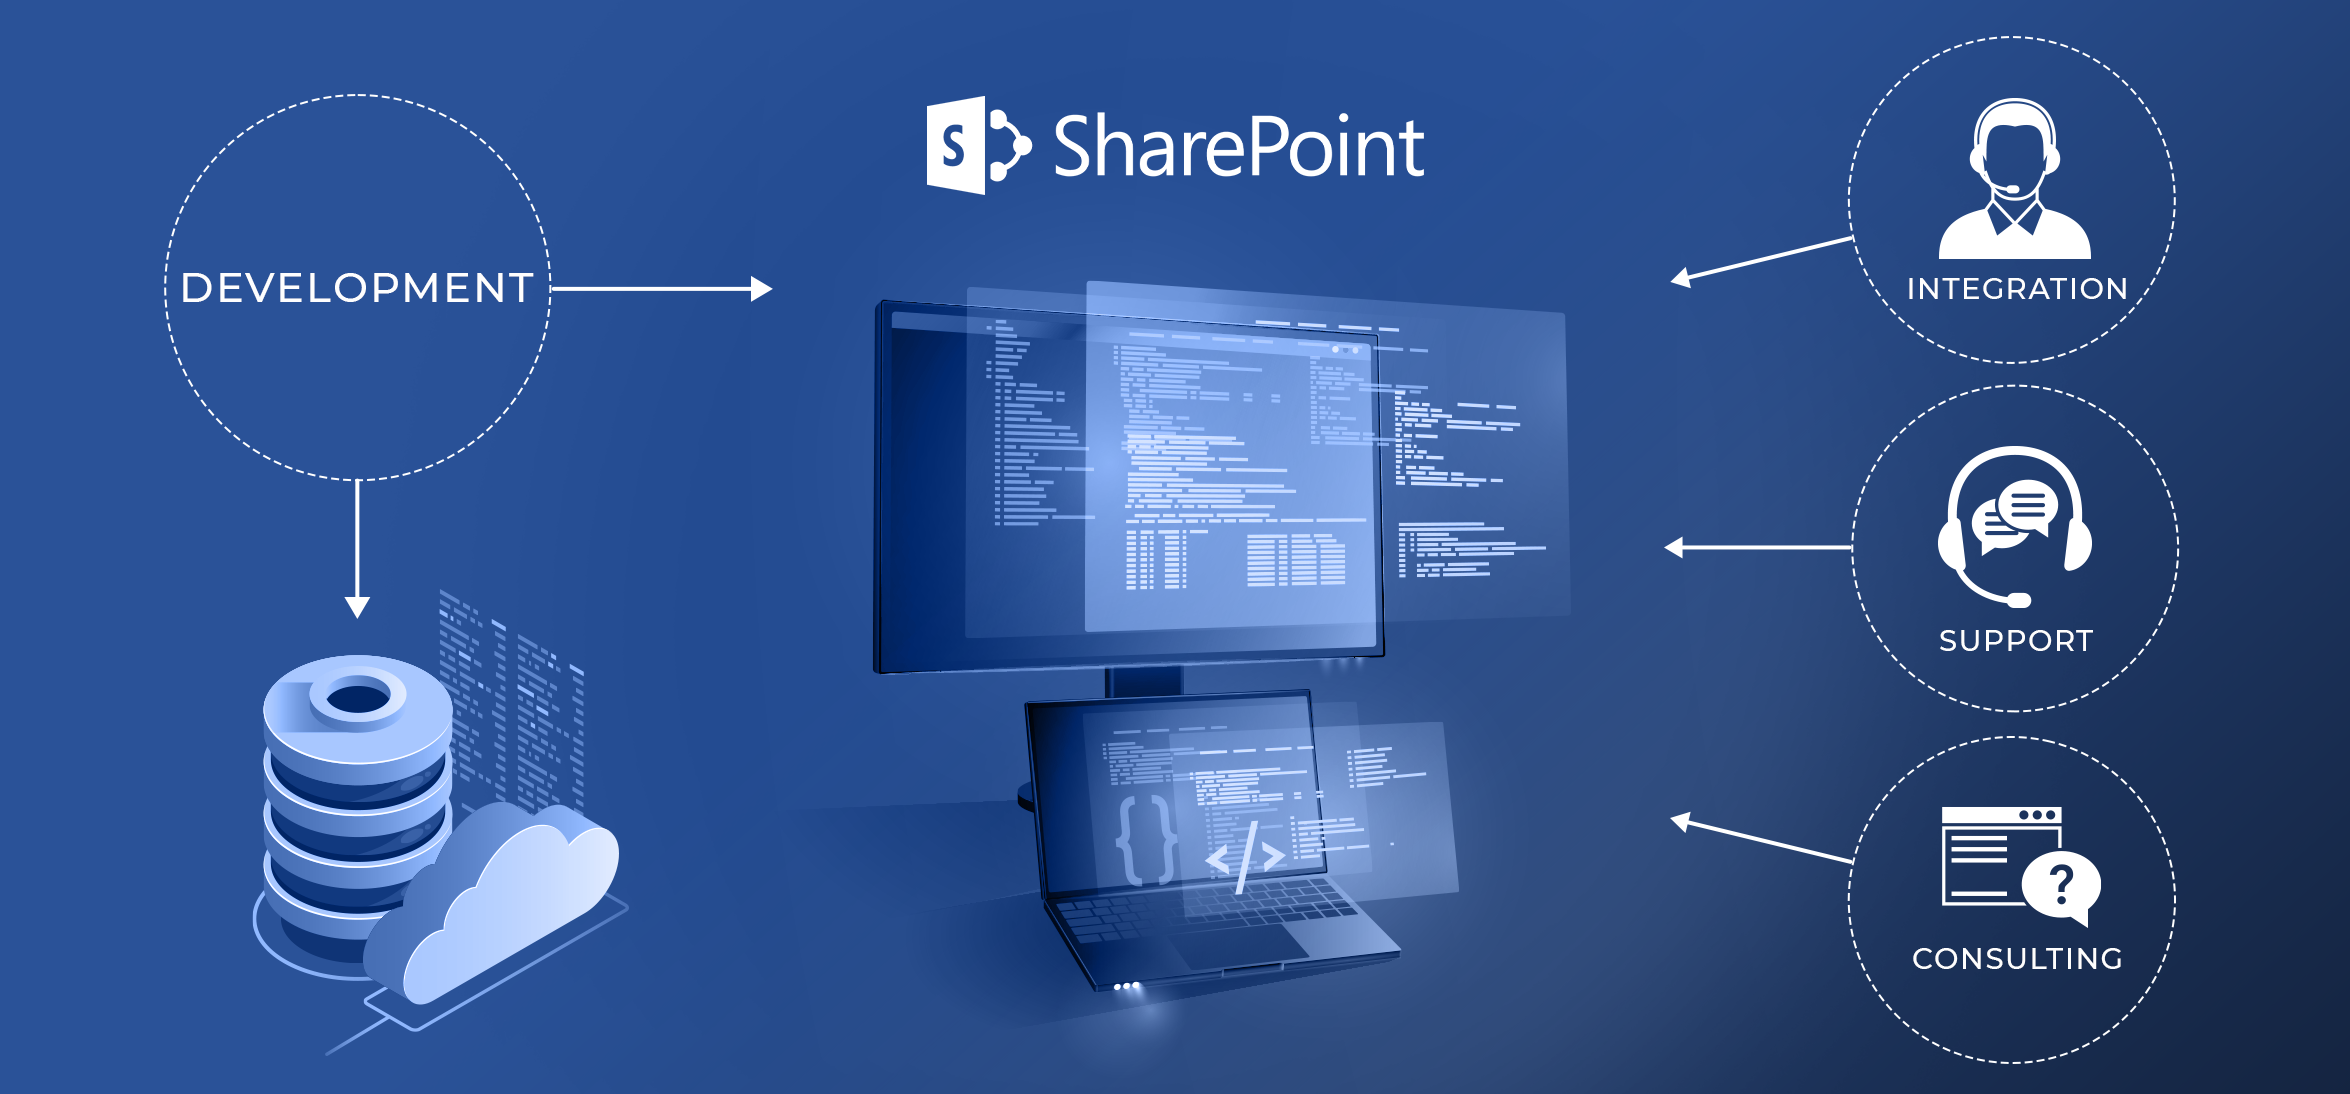 Microsoft Share Point Consult in Laurence Harbor NJ, 08879